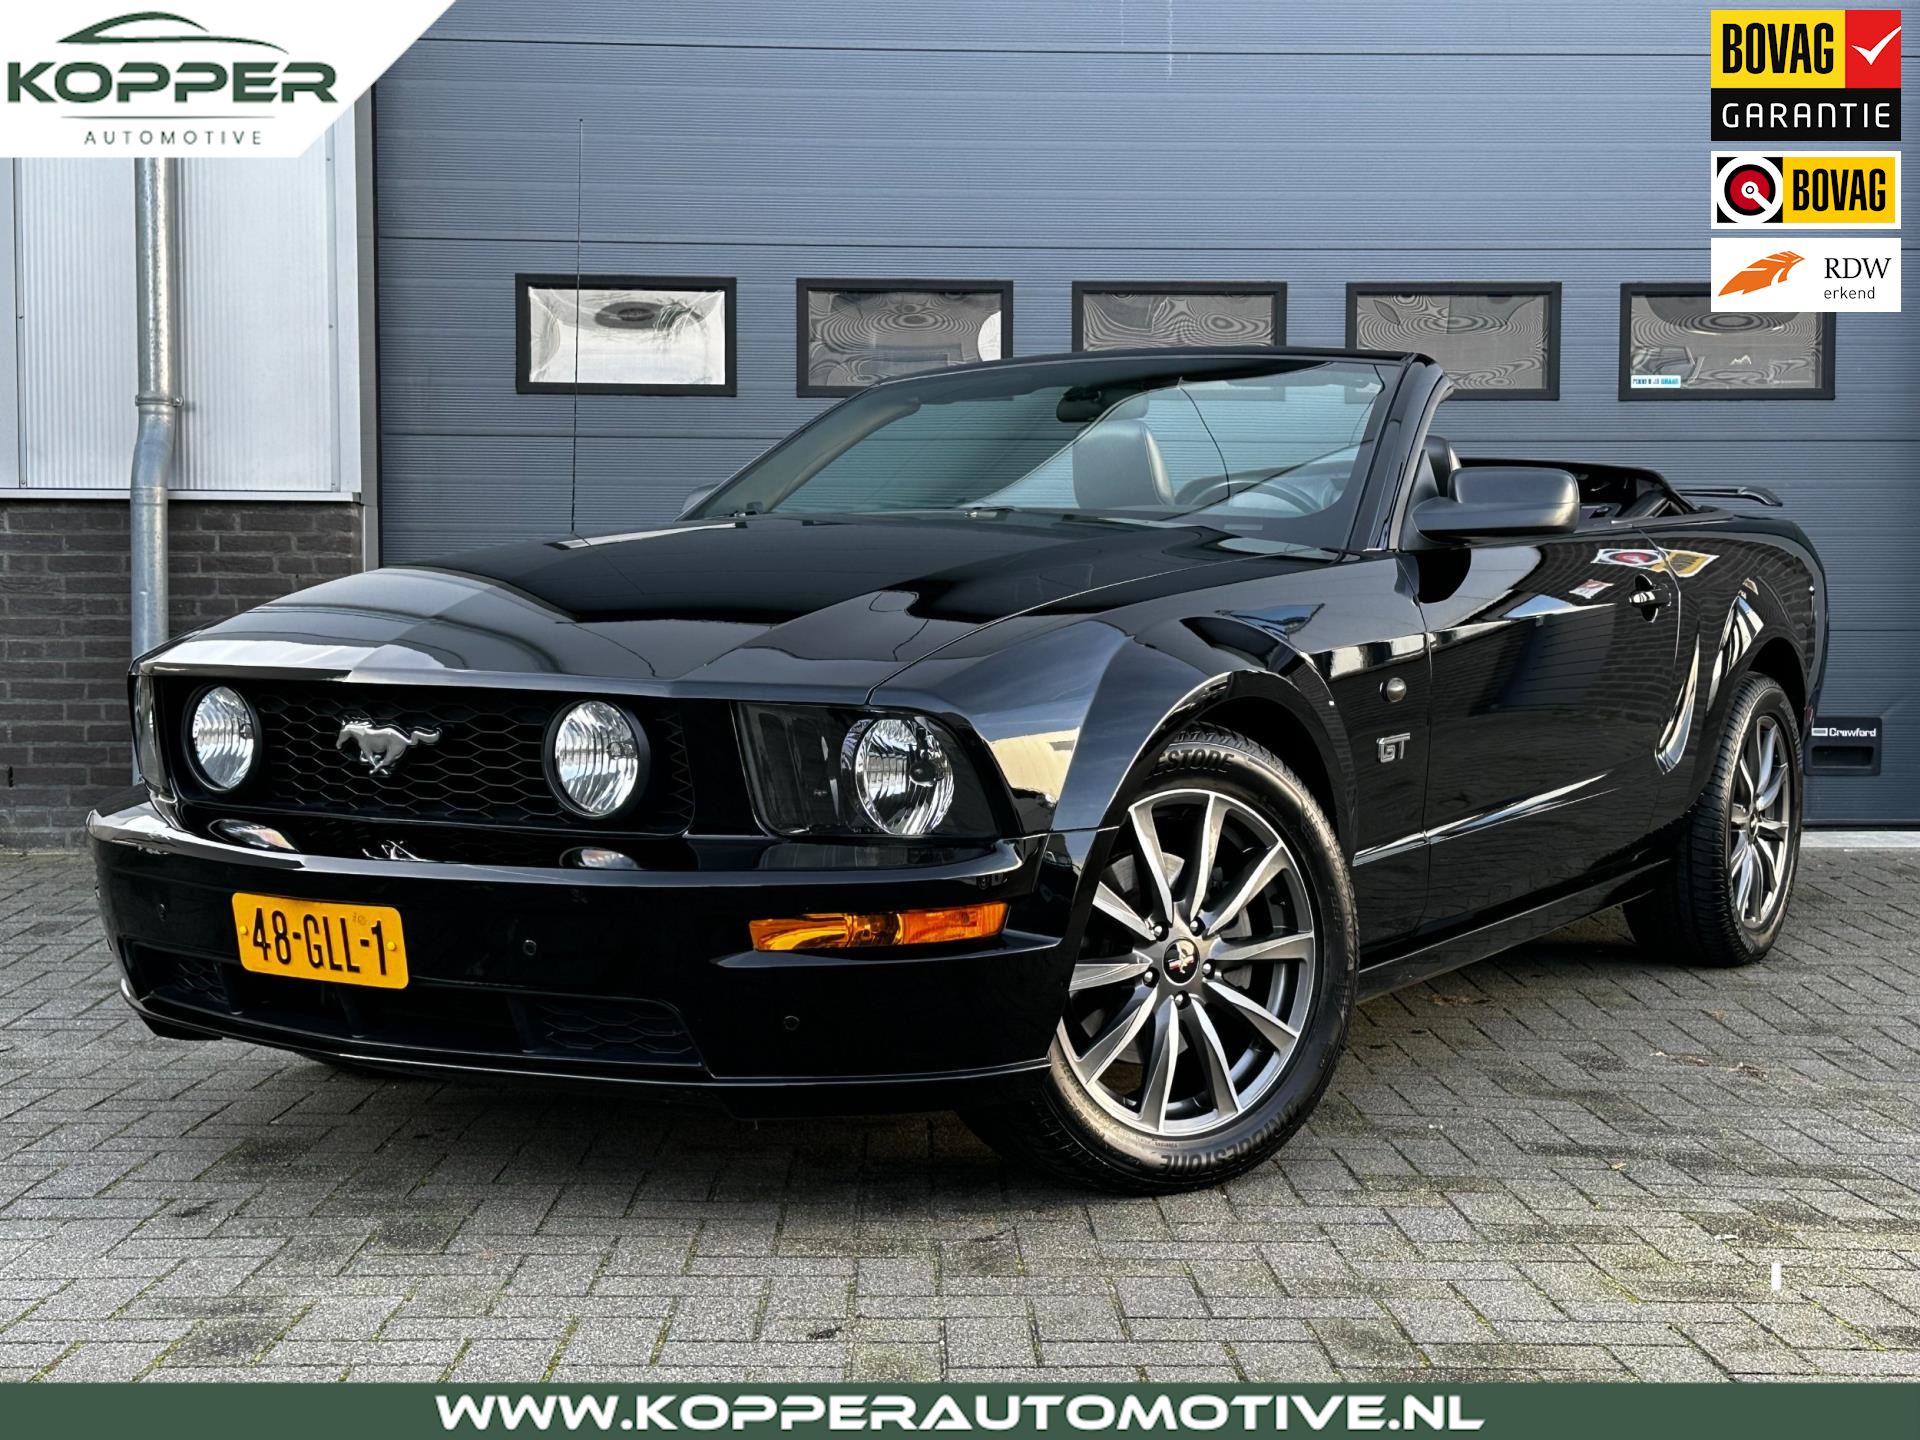 Ford Mustang occasion - Kopper Automotive